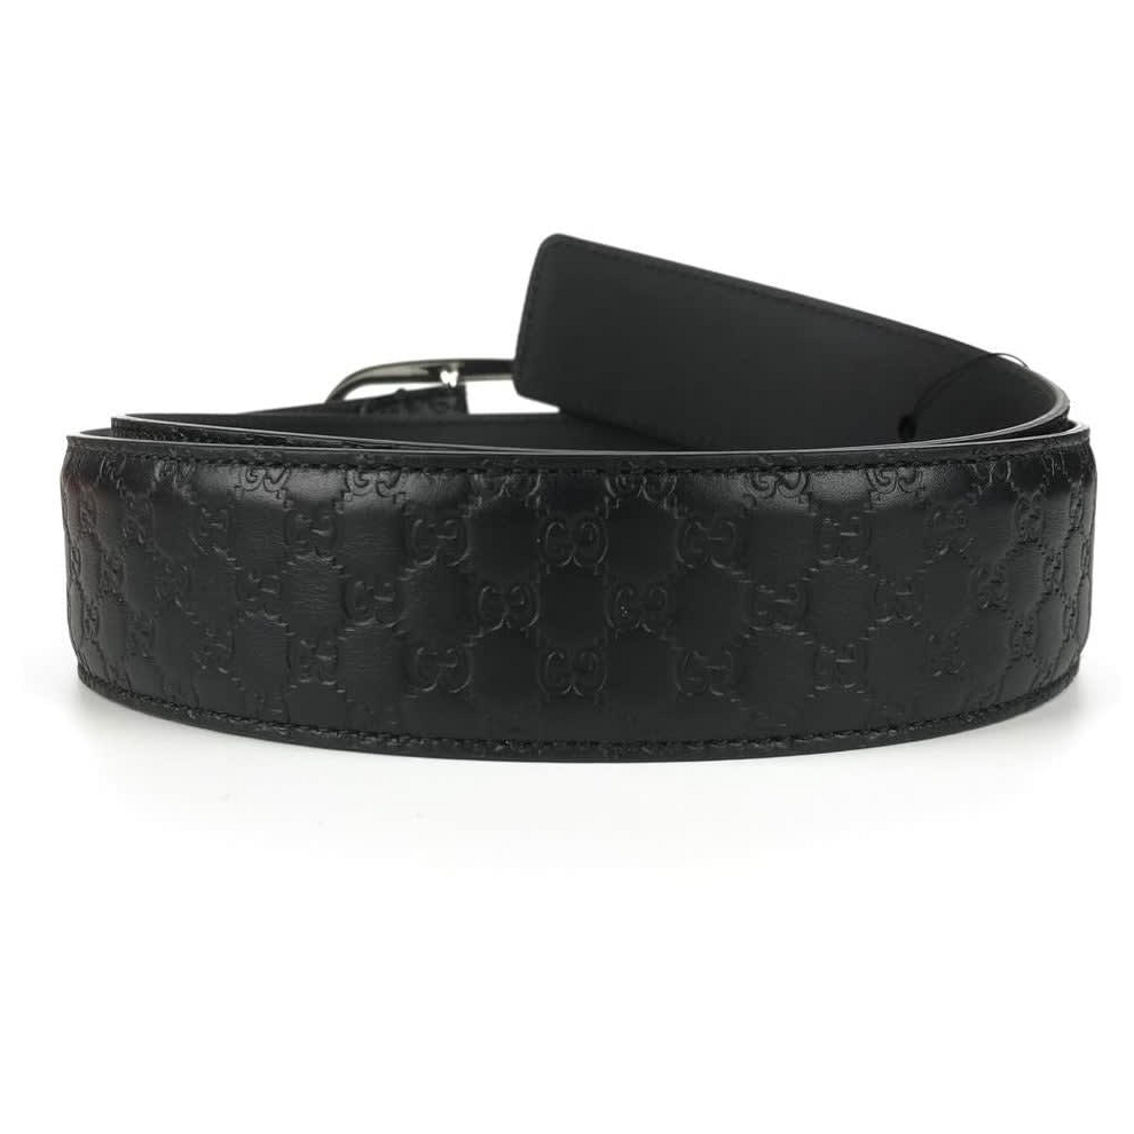 Gucci Mens Micro GG Black Calf Leather Silver Buckle Belt Size 95/38 (New) - Image 3 of 5